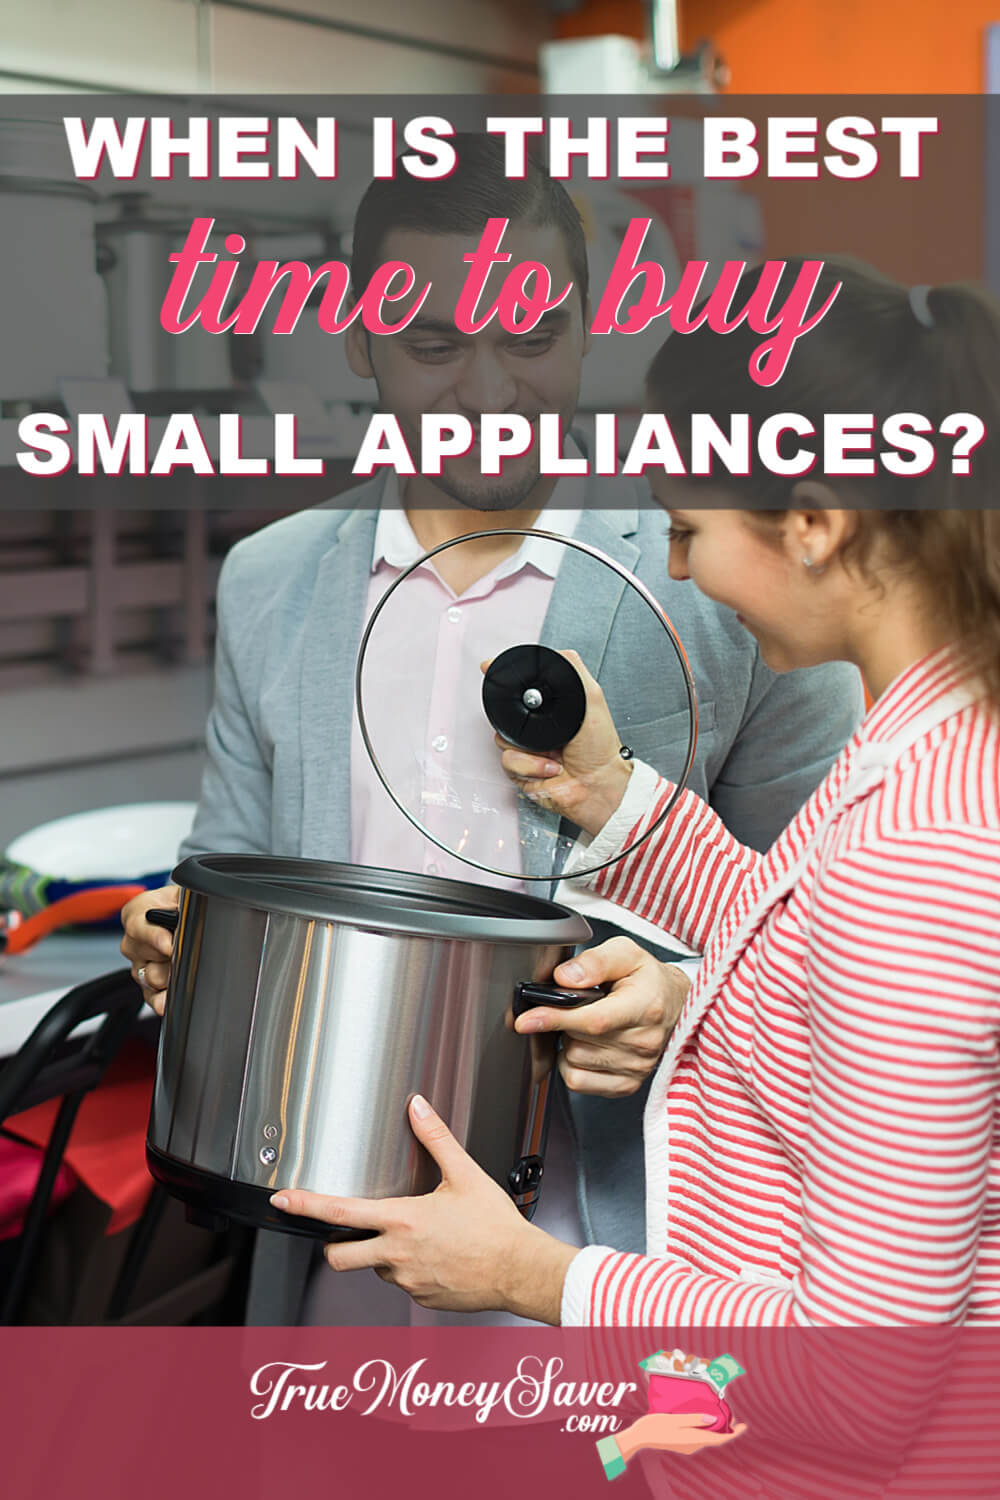 When Is The Best Time To Buy Small Appliances For The Kitchen?